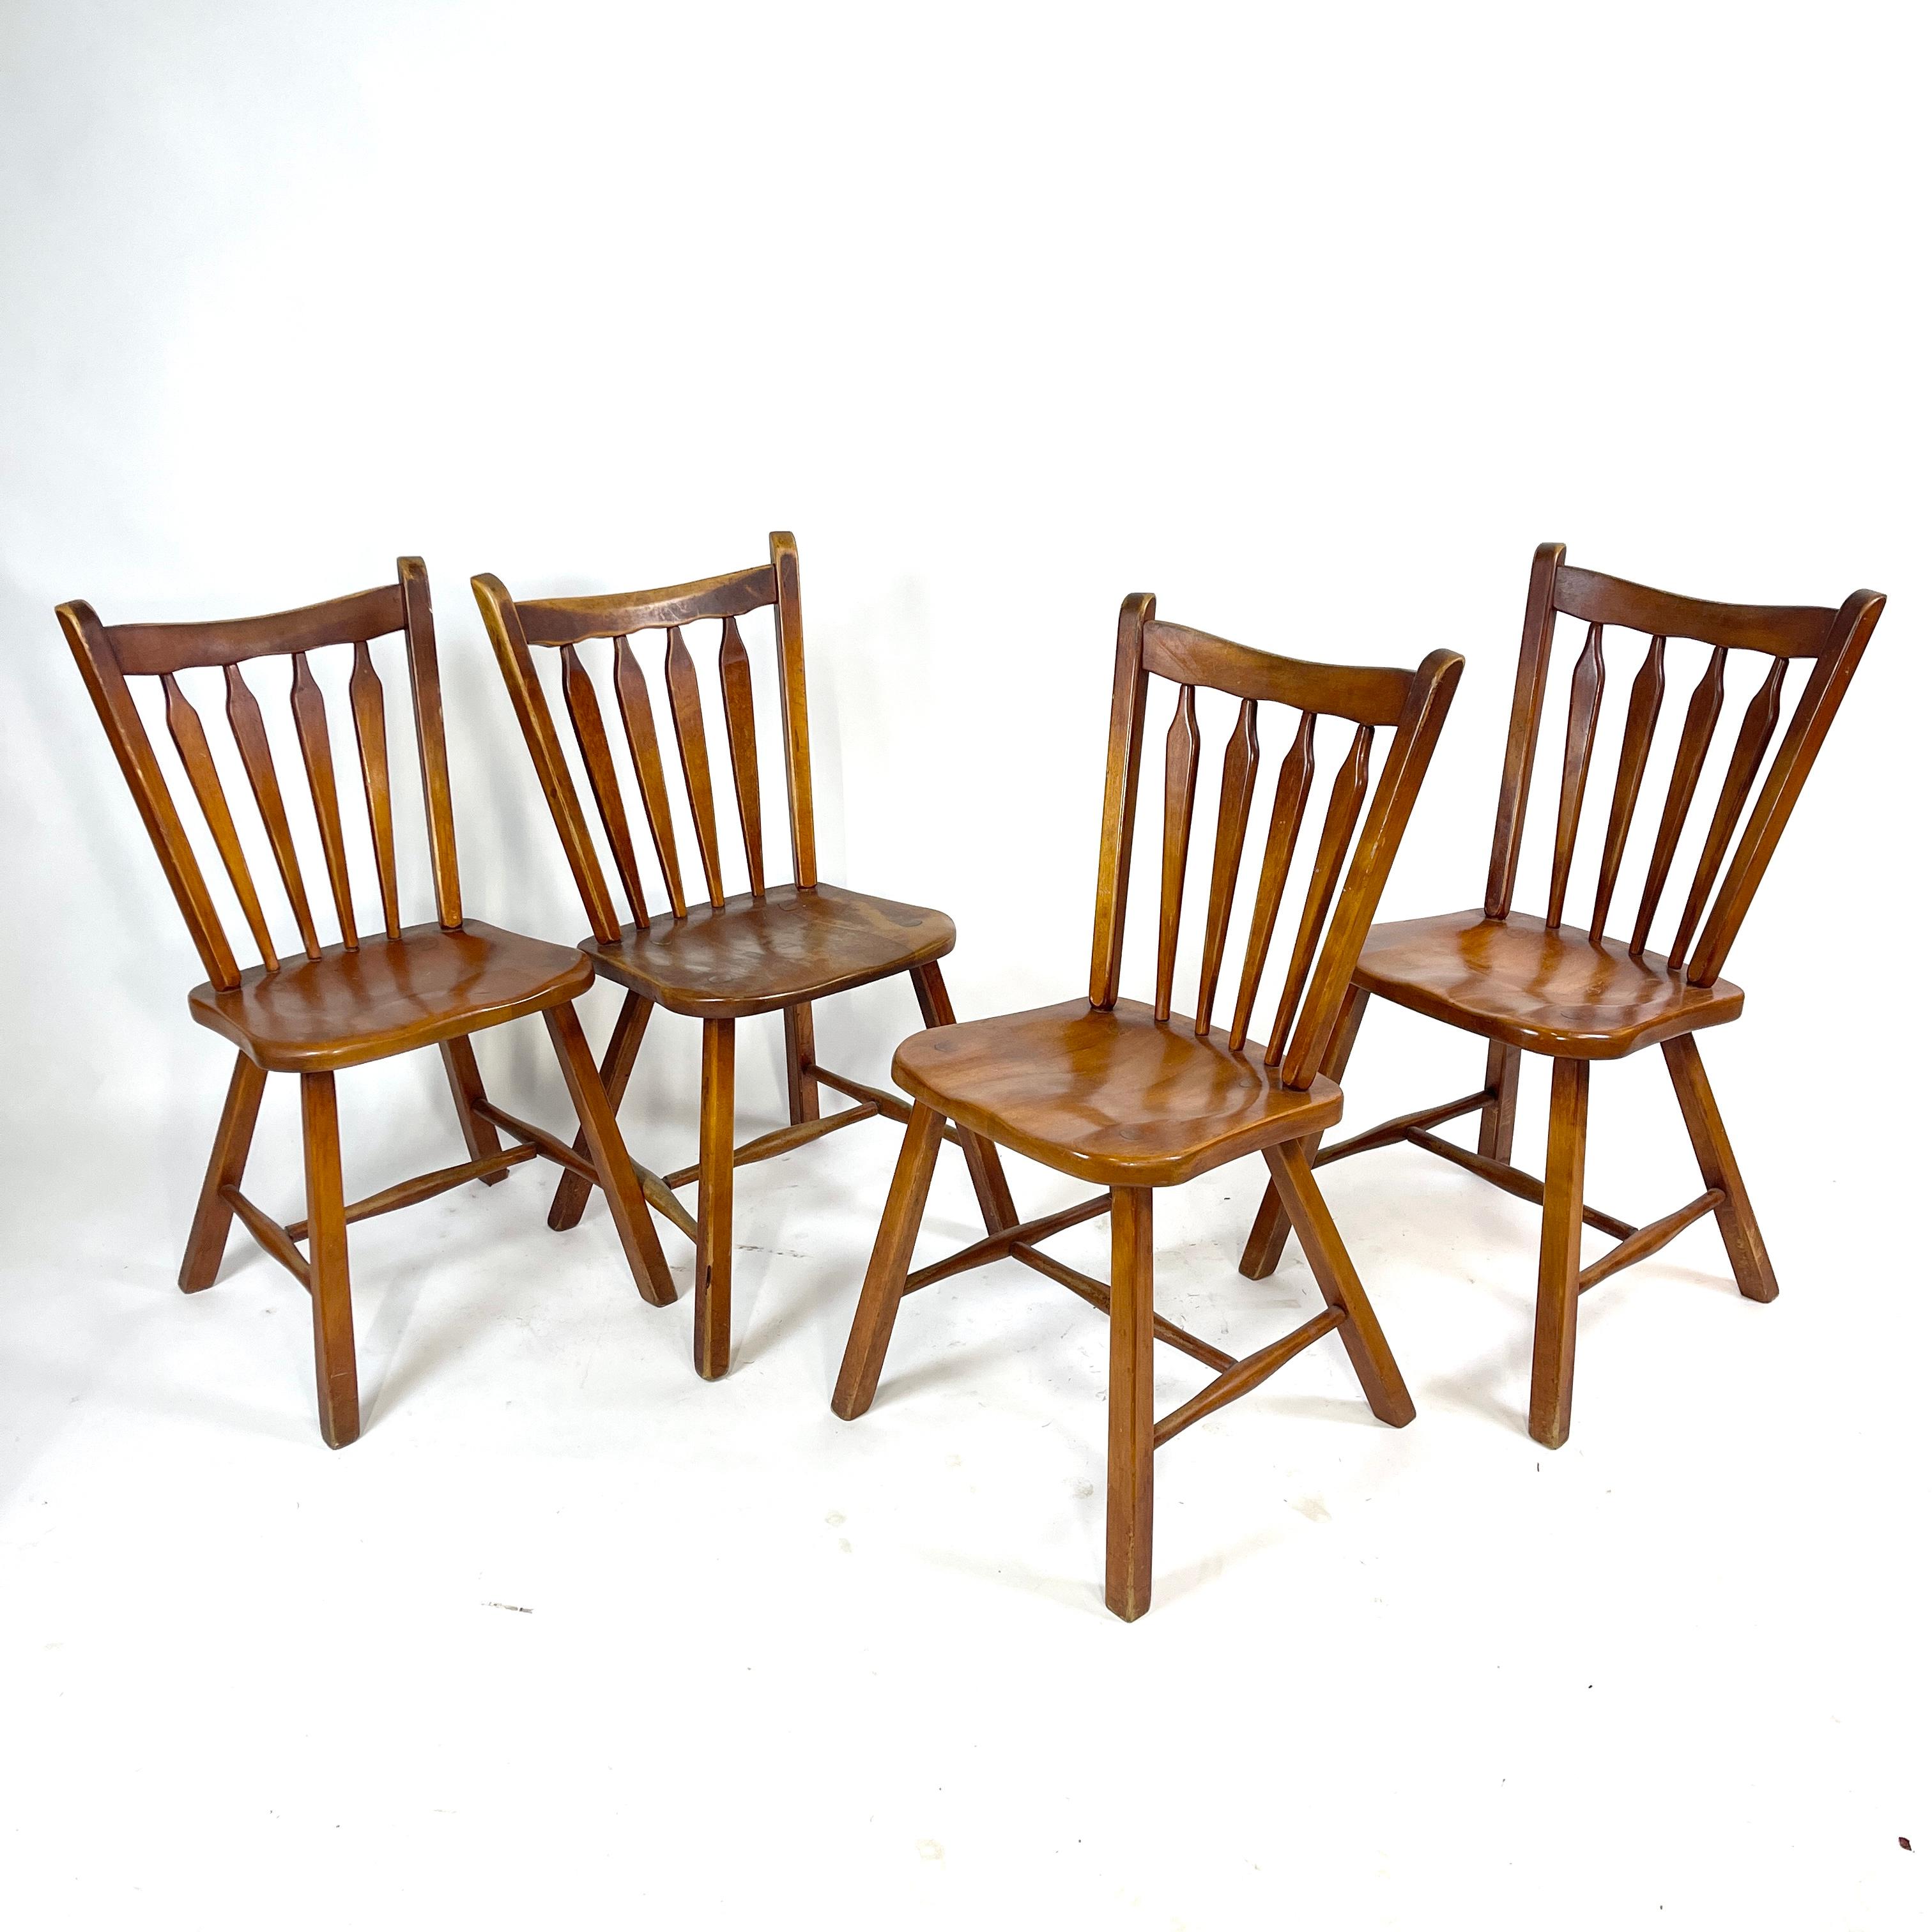 Four Hard Rock Vermont Maple Americana Dining Chairs, Herman DeVries for Cushman 1